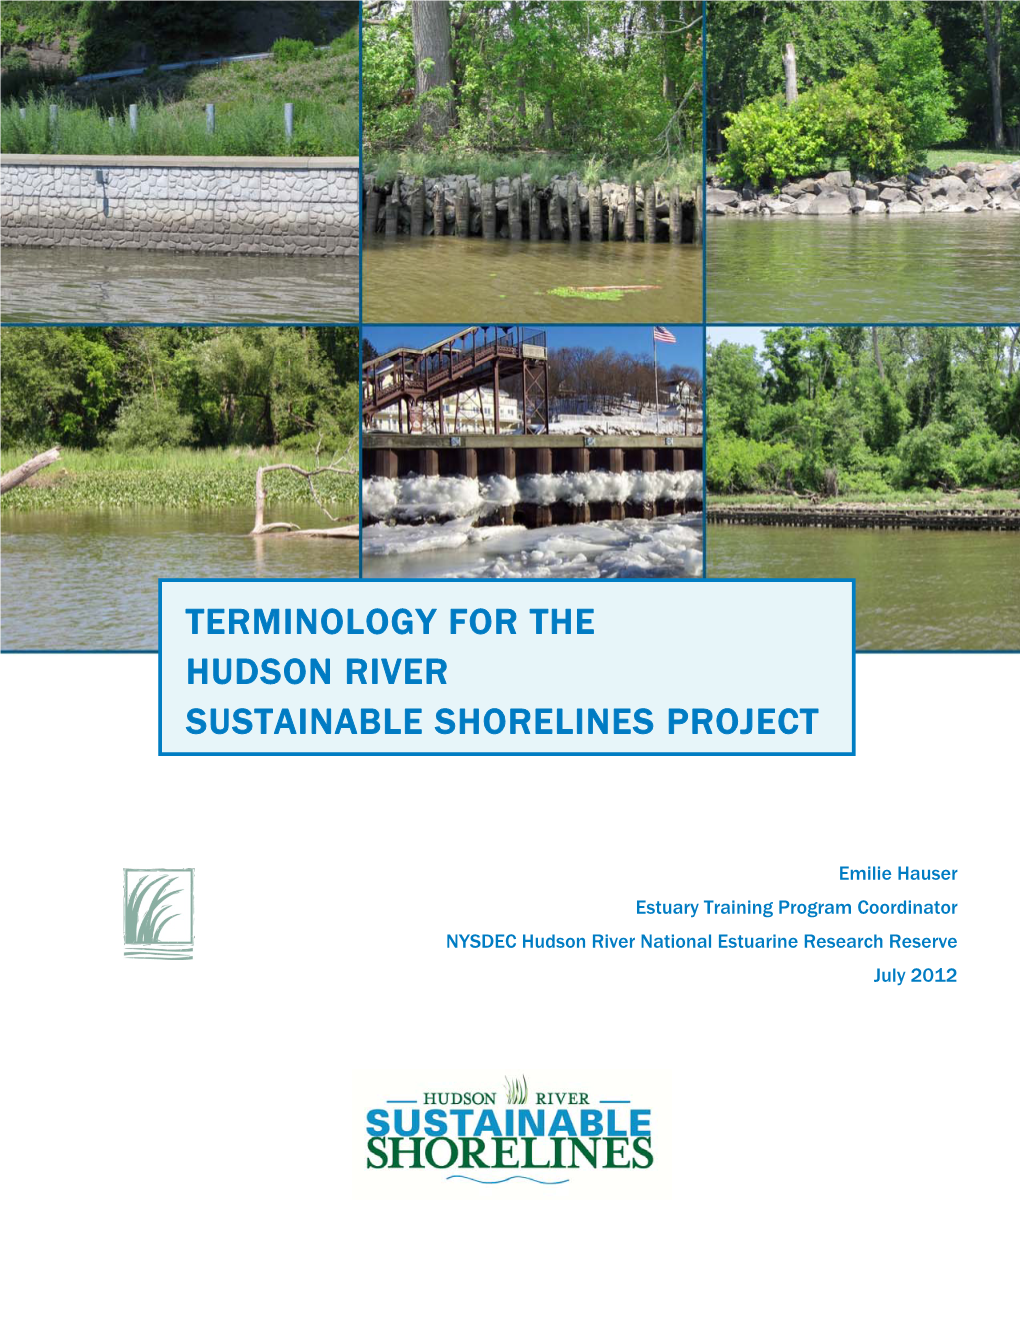 Terminology for the Hudson River Sustainable Shorelines Project